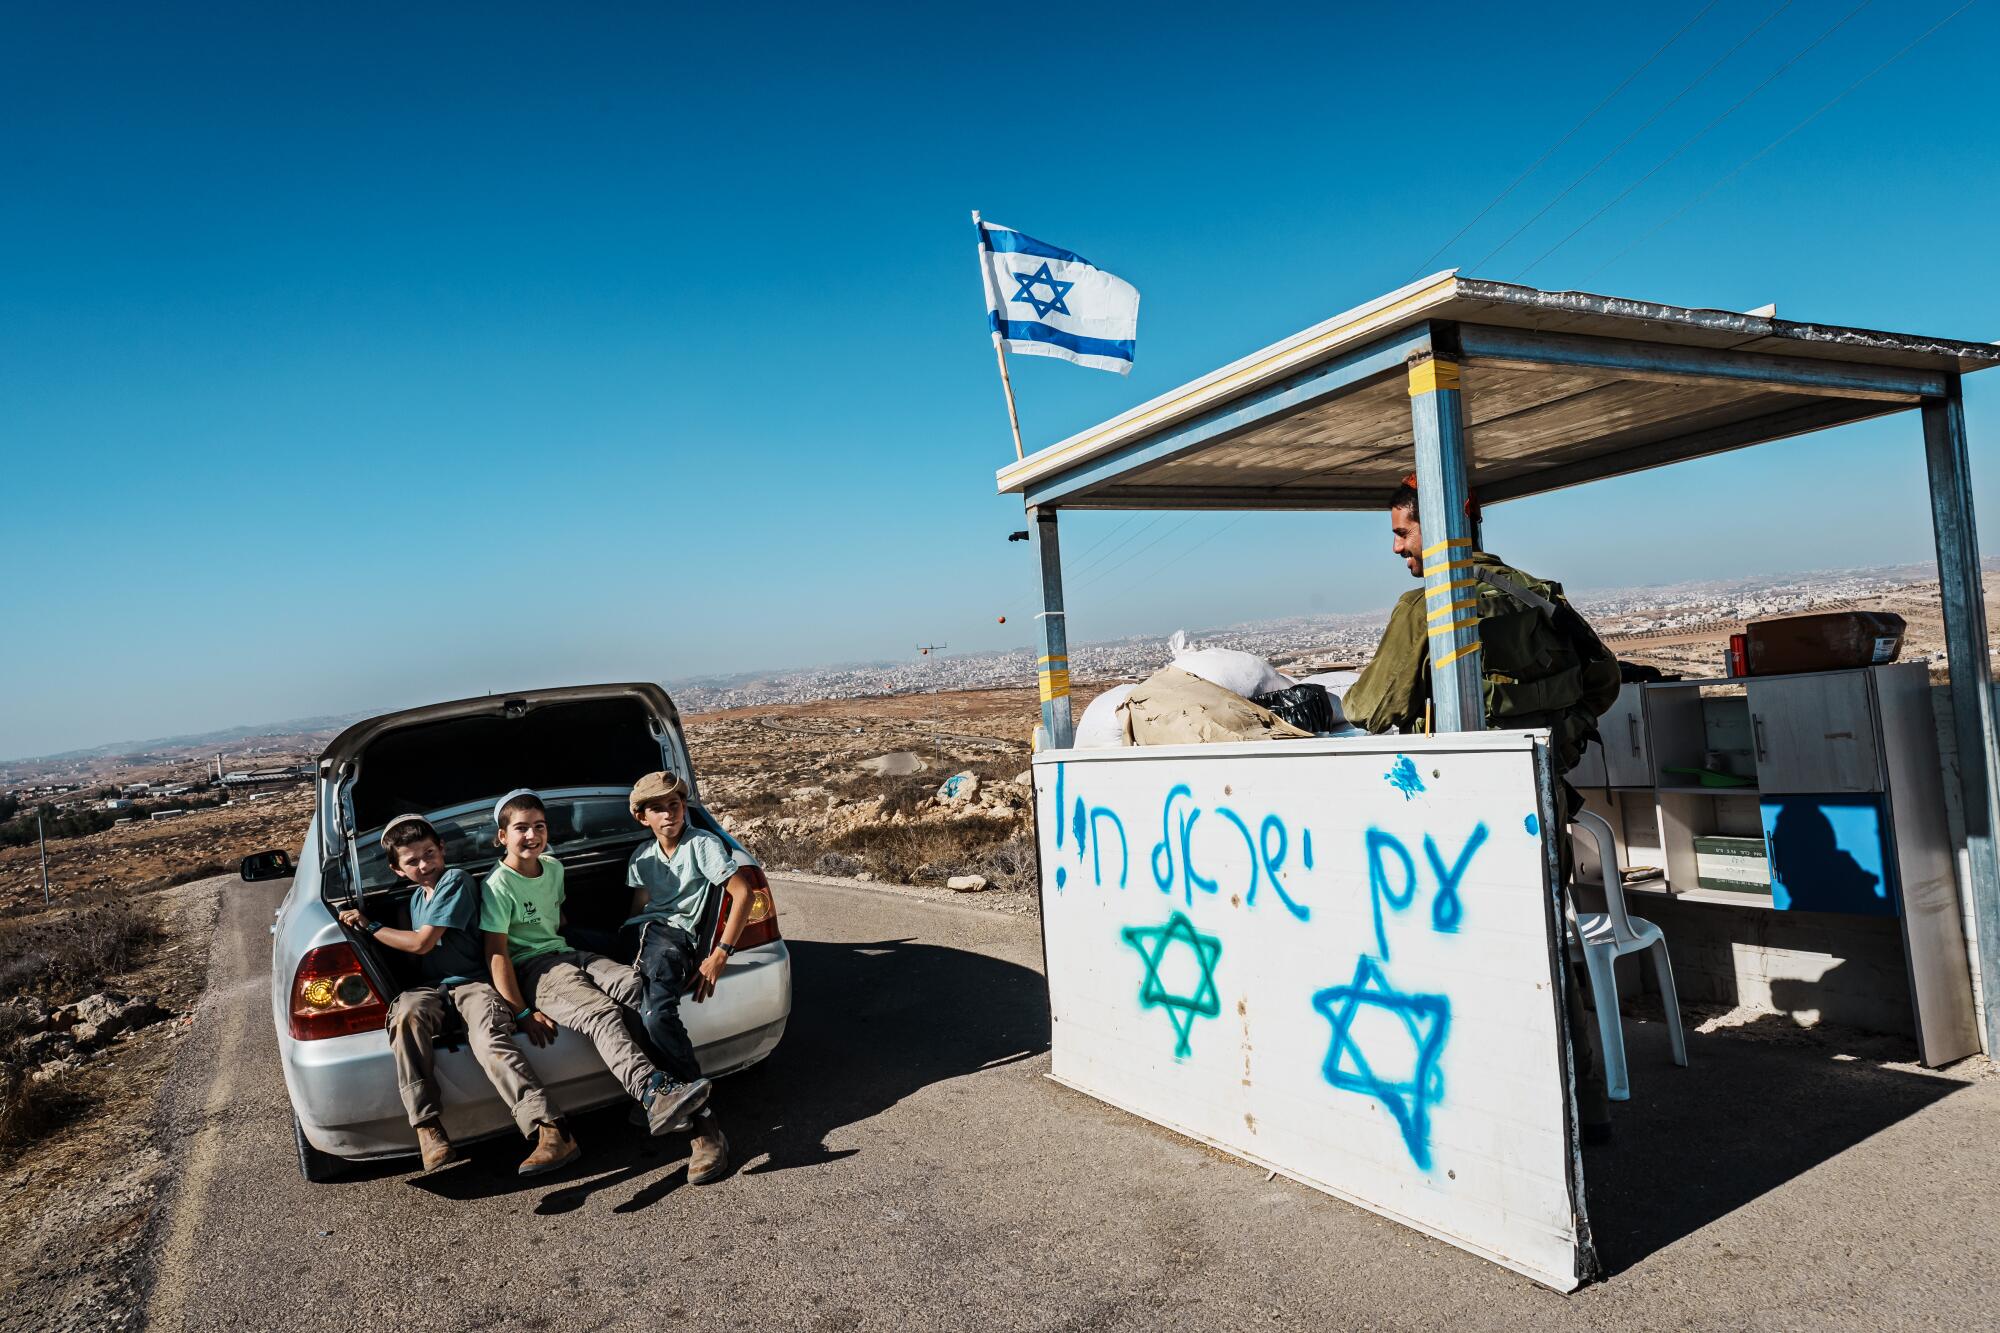 A man in a roadside stand with a blue-and-white flag looks at three young people sitting in the open trunk of a car 